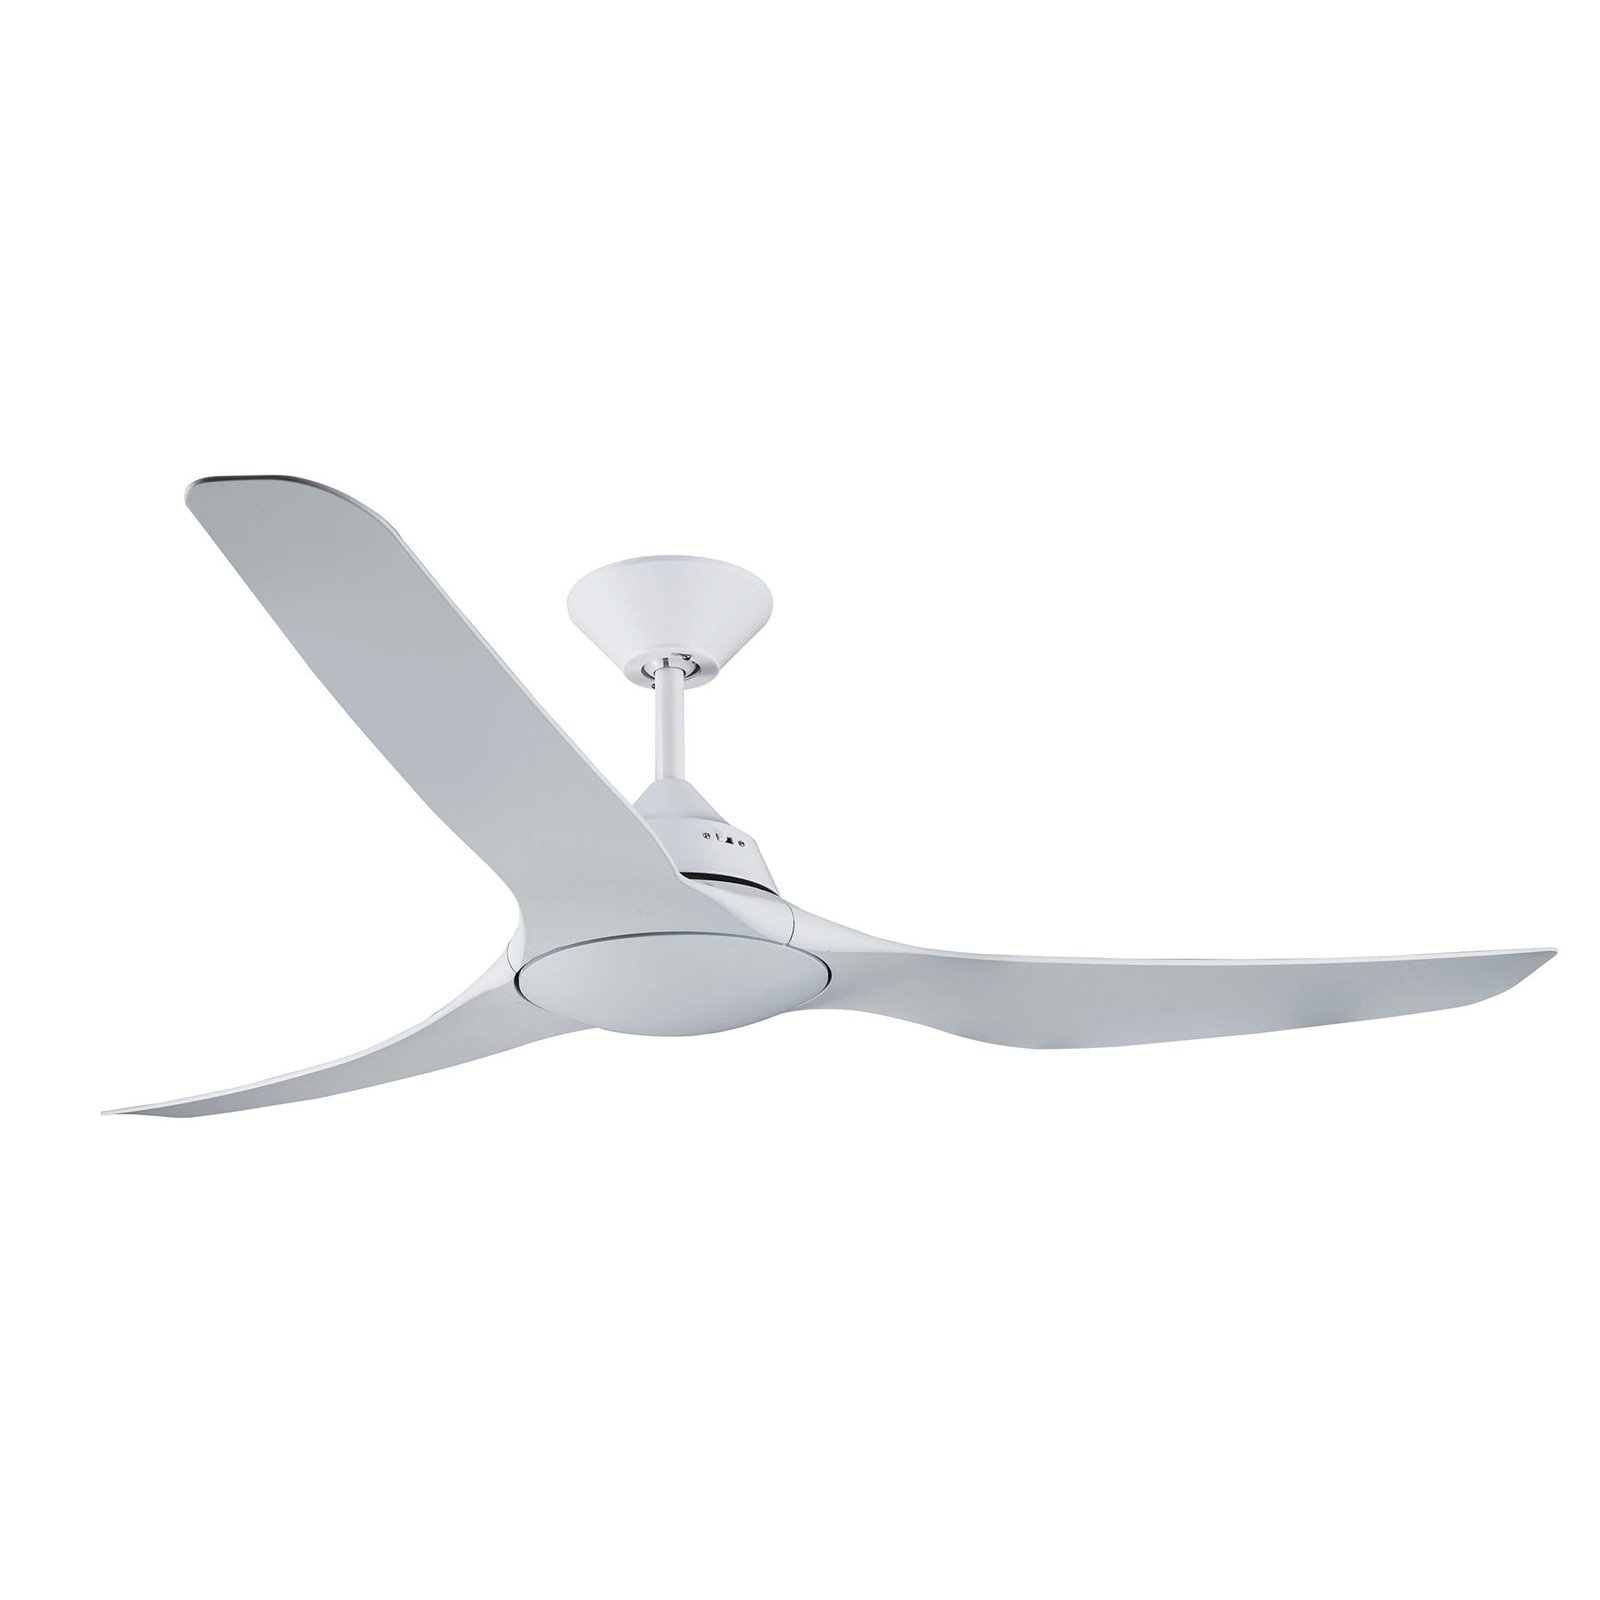 Mariner ceiling fan, white, without light